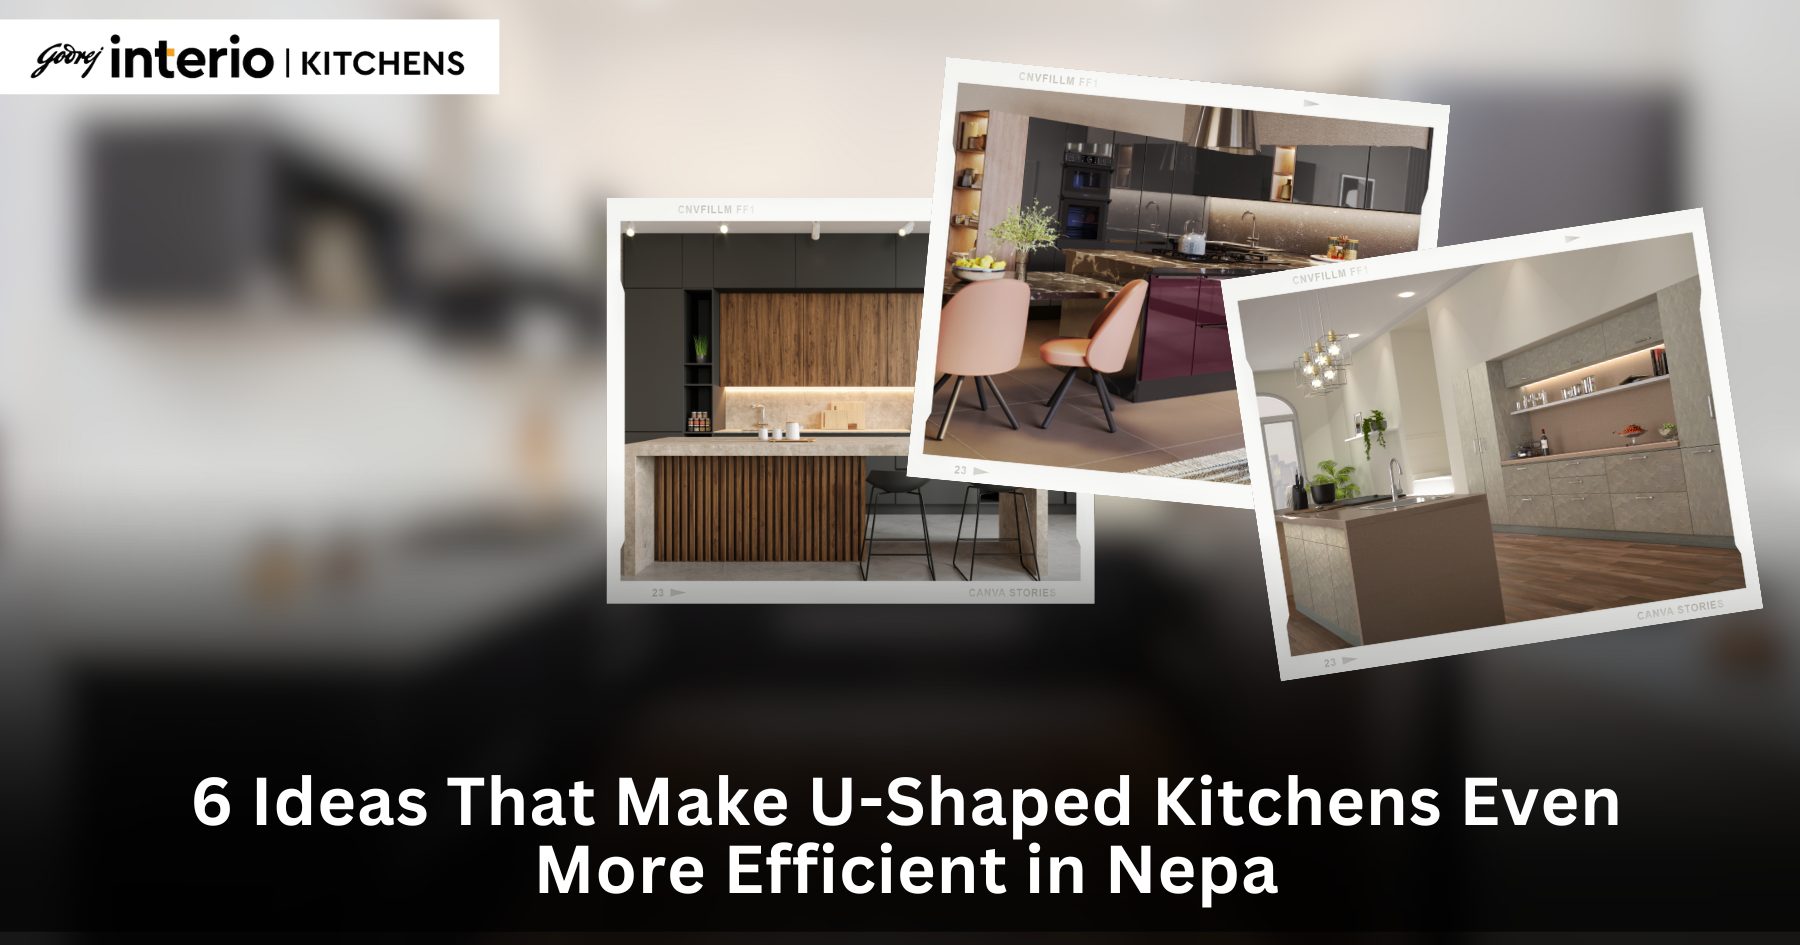 6 Ideas That Make U-Shaped Kitchens Even More Efficient in Nepal